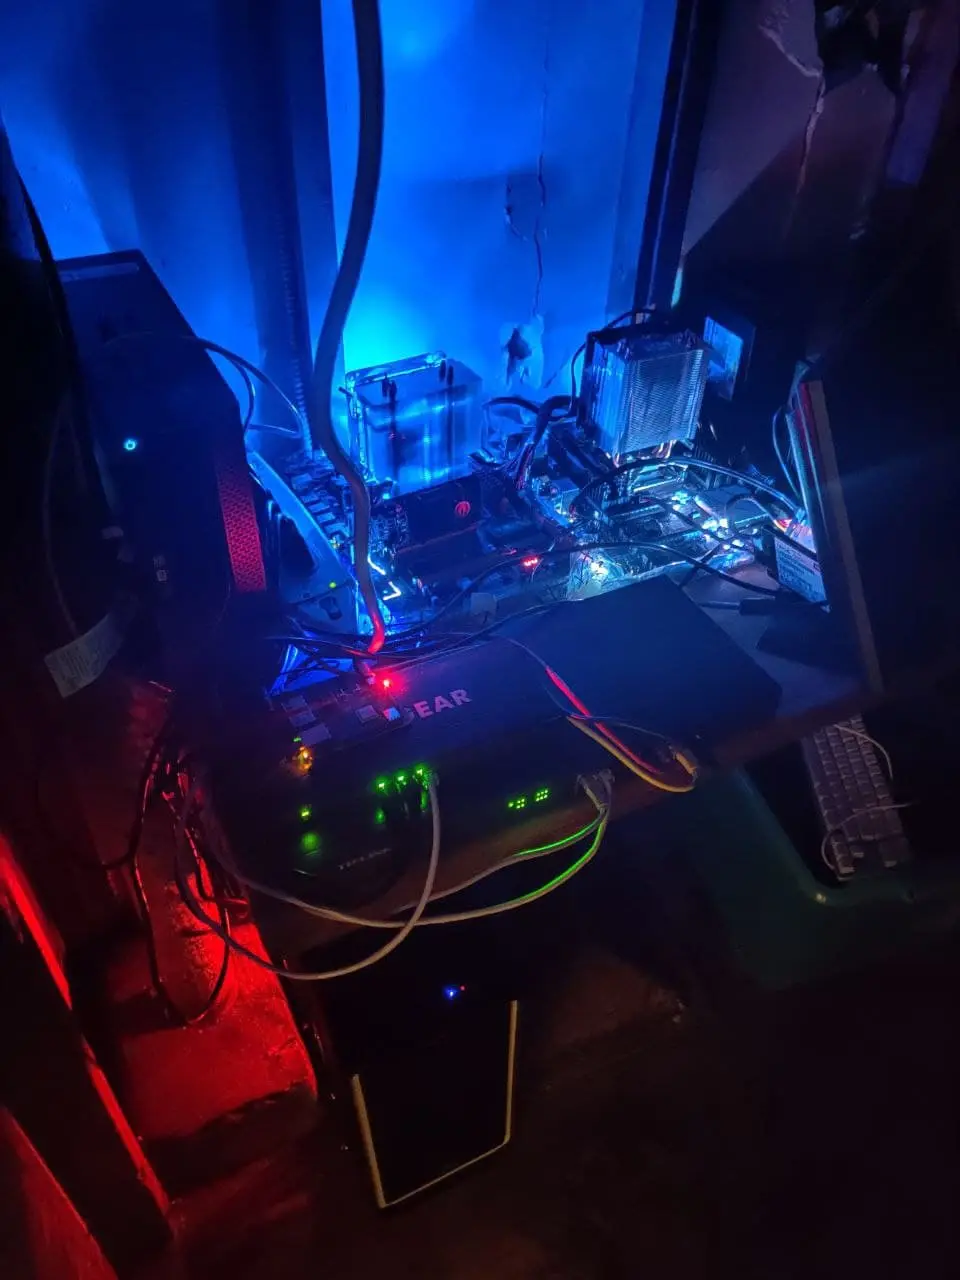 Picture of several server computers glowing blue in the dark.